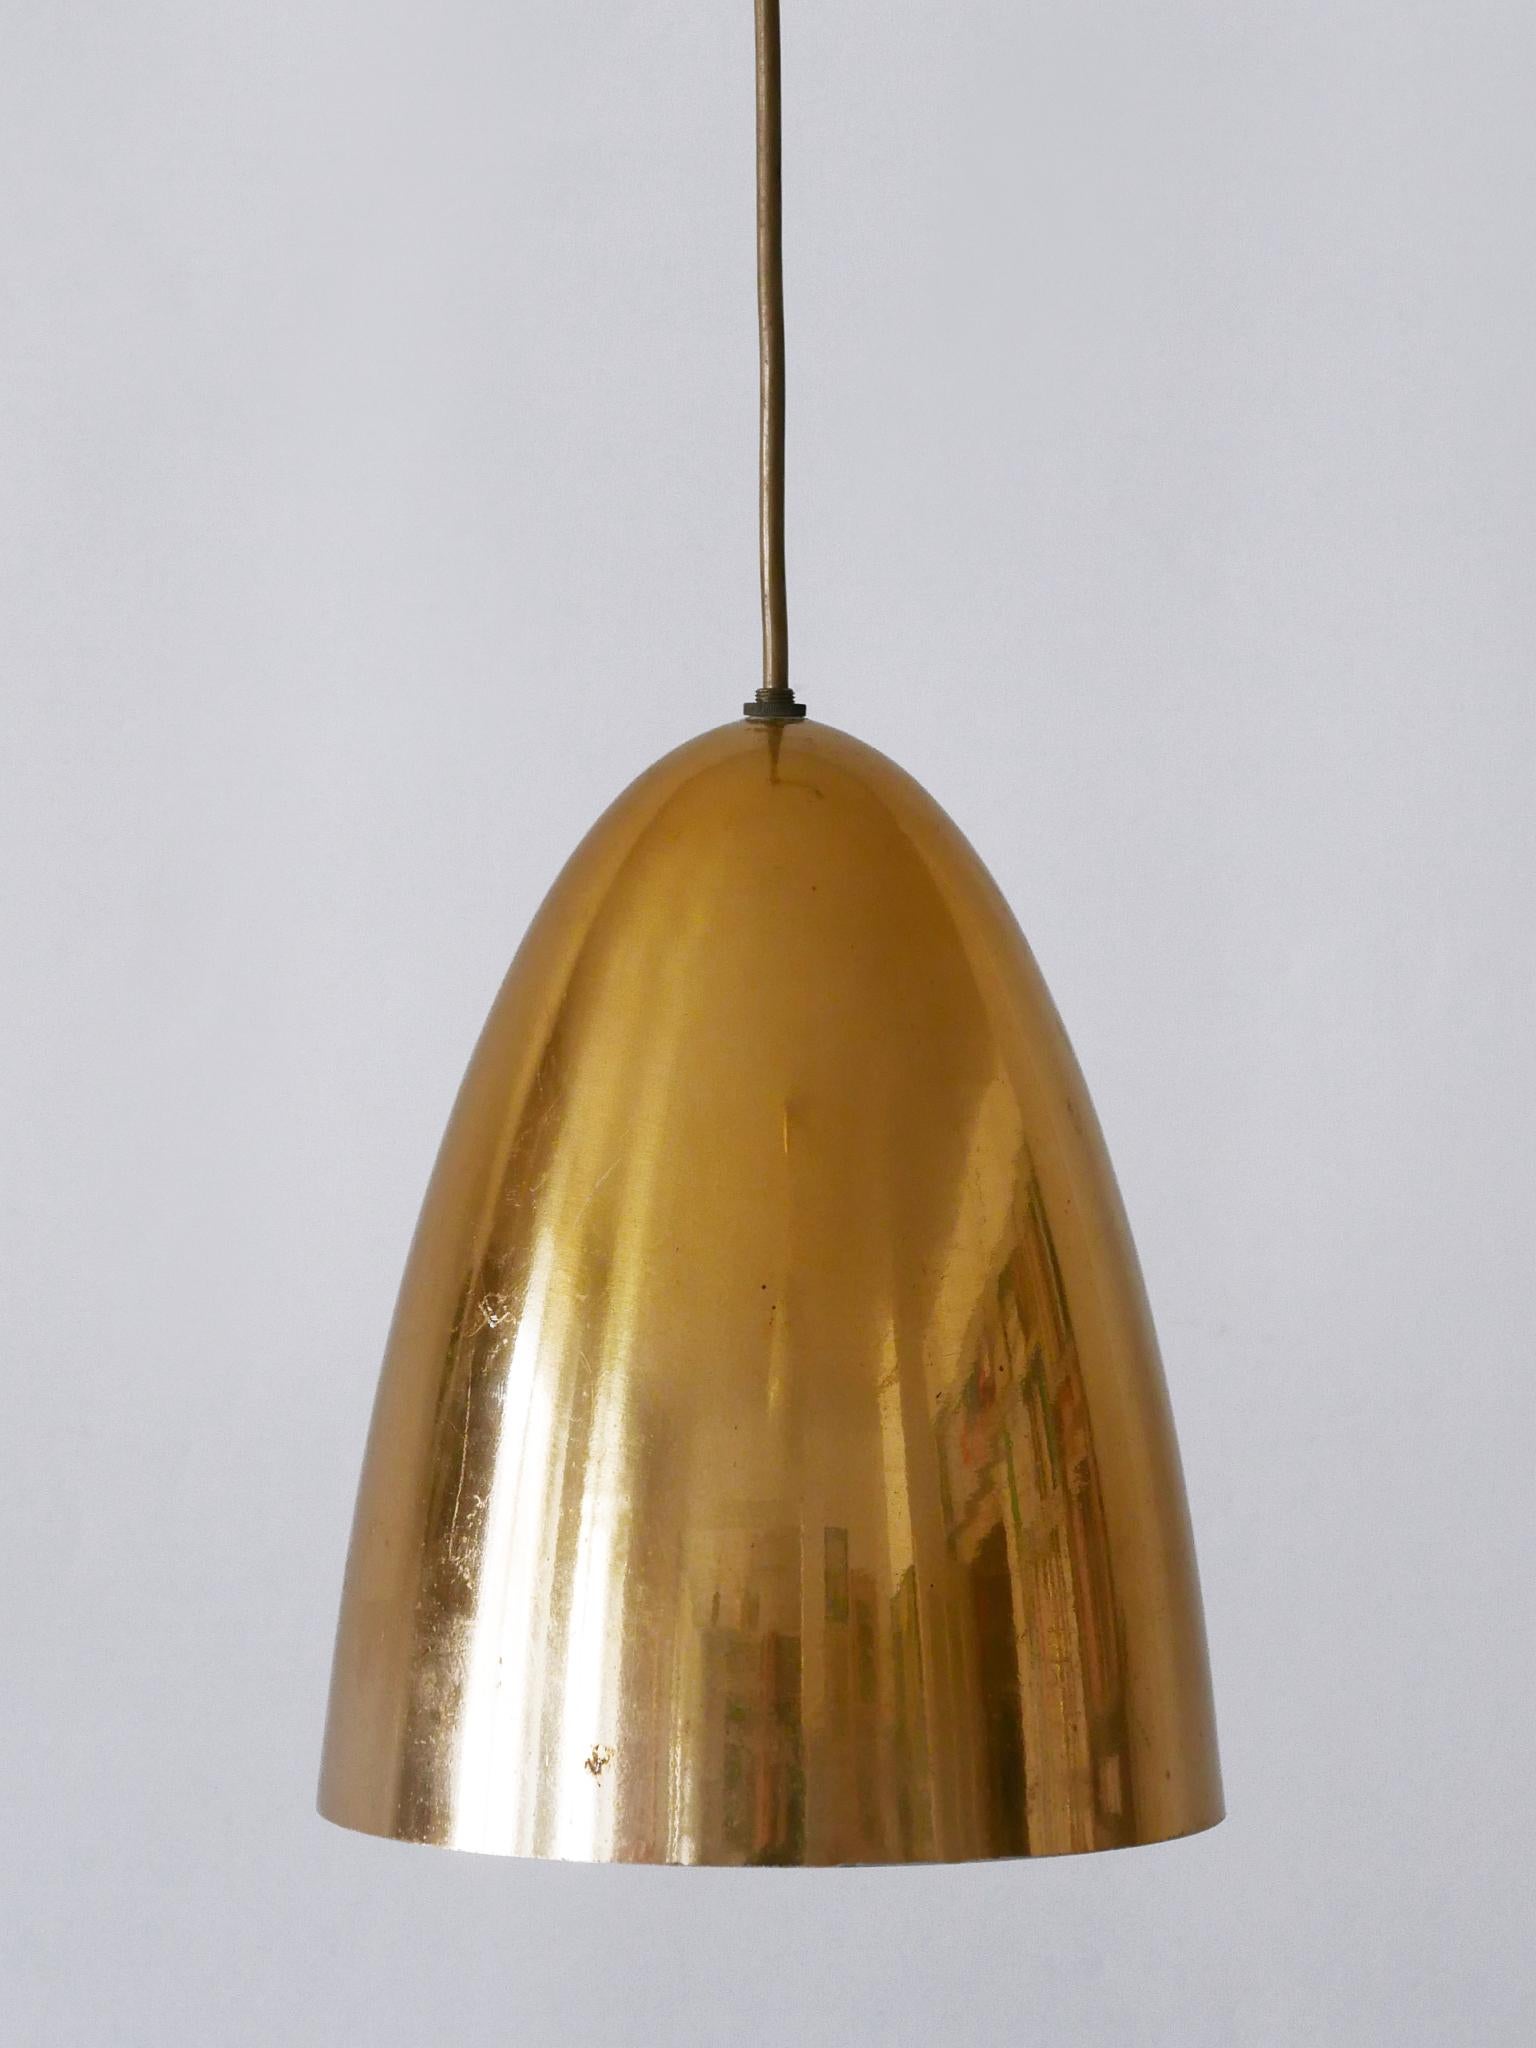 1 of 4 Elegant Mid Century Modern Pendant Lamps or Hanging Lights Germany 1950s In Good Condition For Sale In Munich, DE